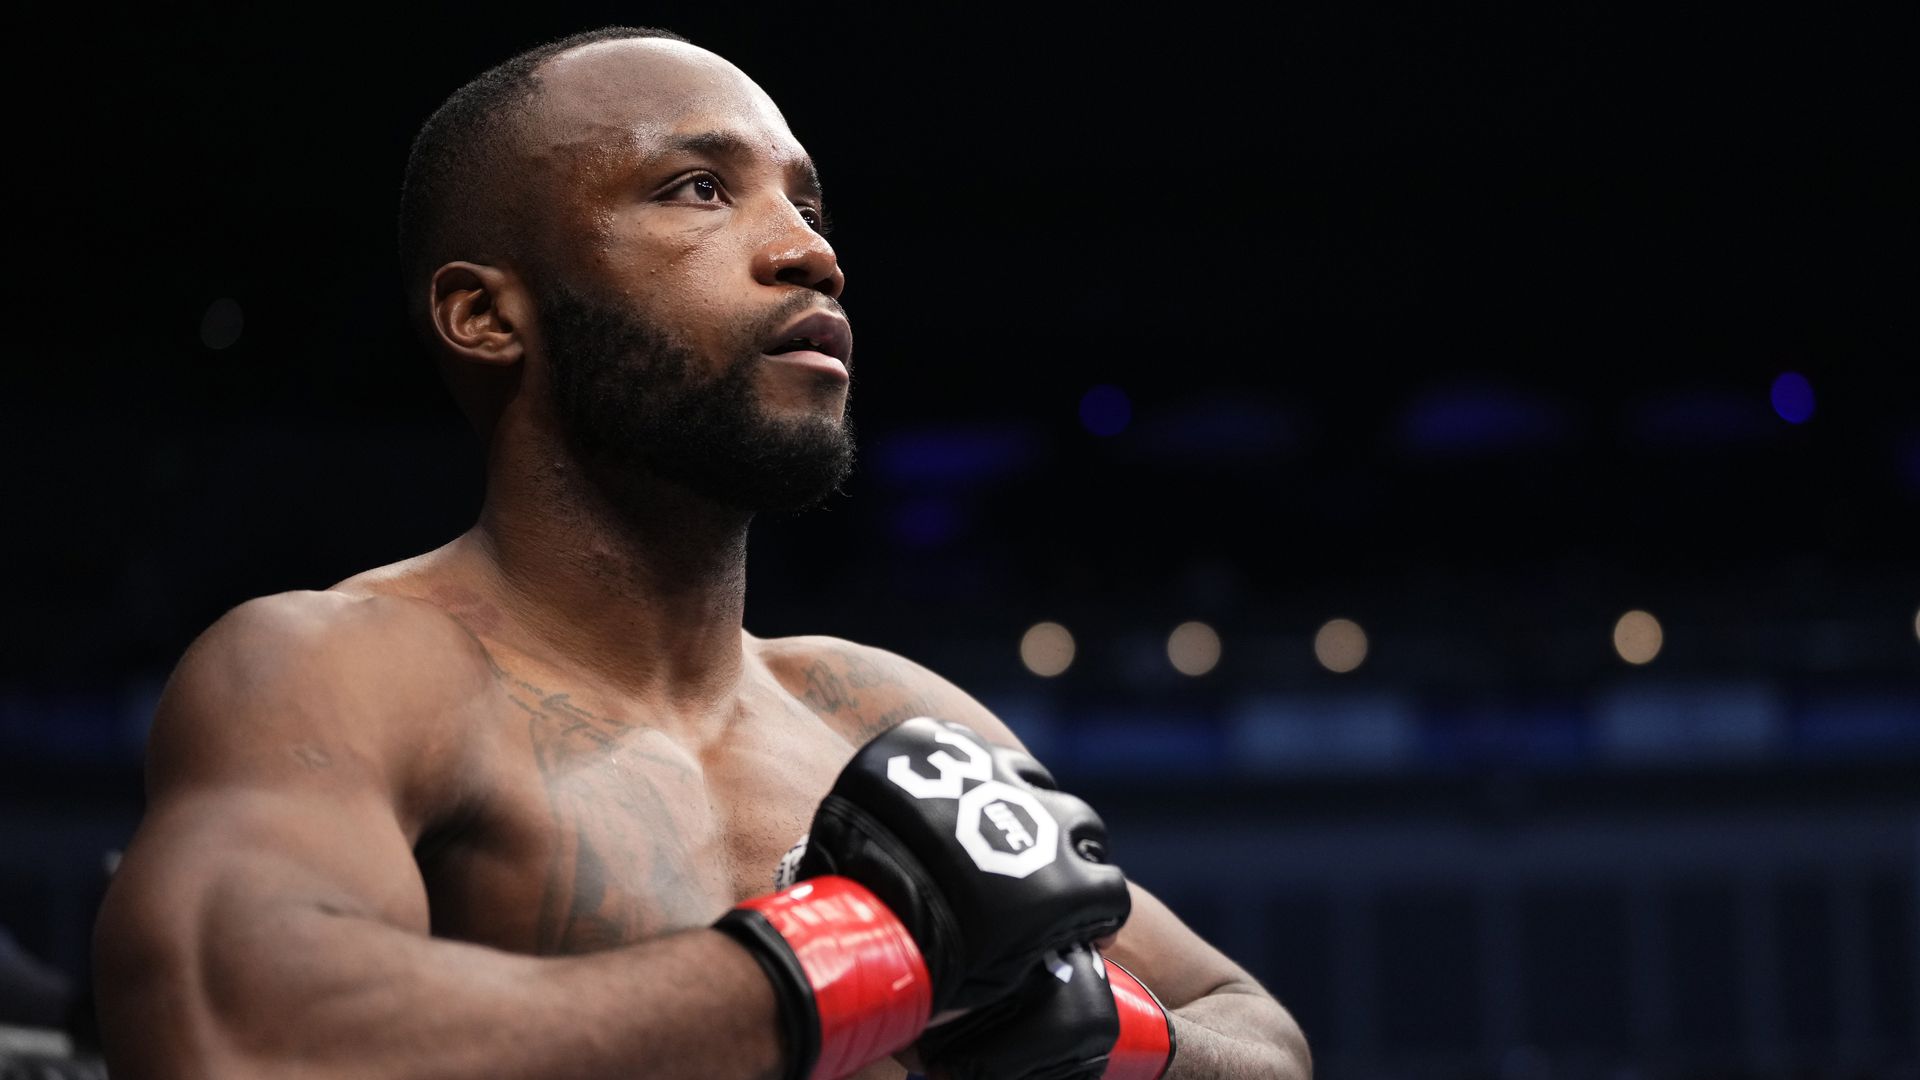 leon edwards responds to rumors he knocked out ian machado garry, answers belal muhammad’s challenge